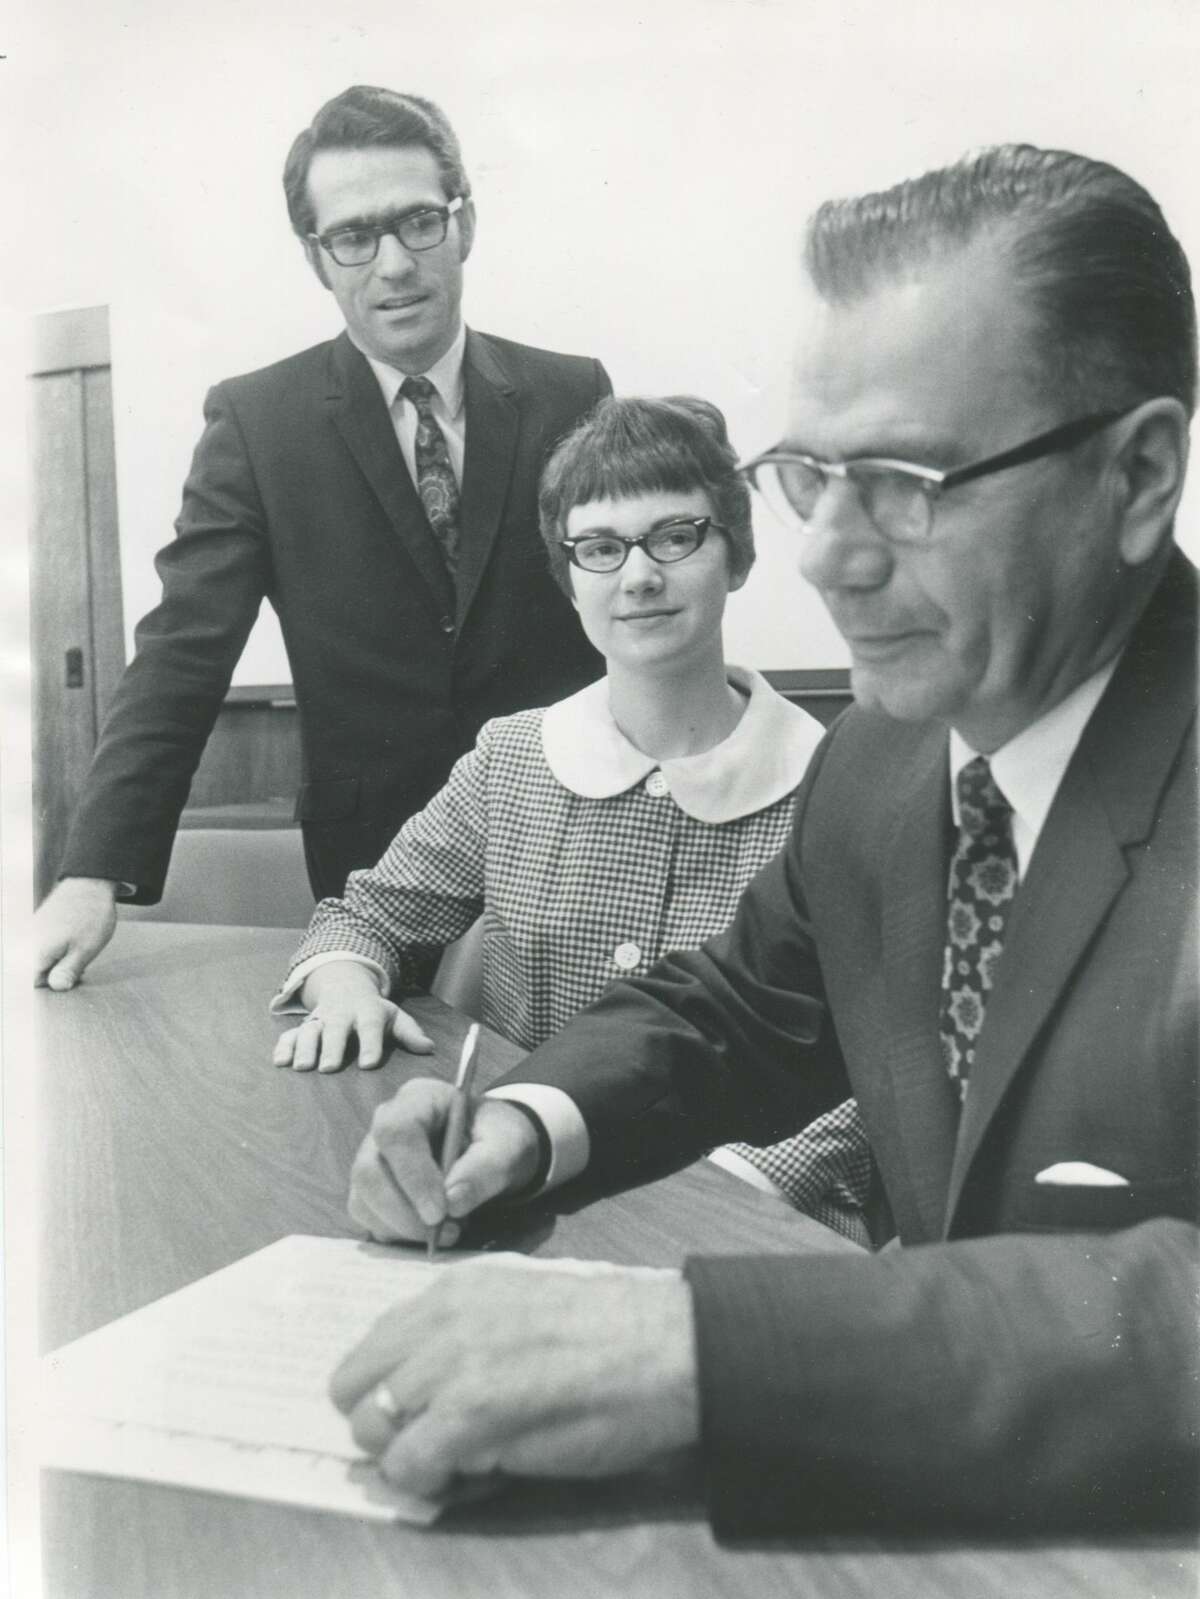 Julius Blasy, Mayor of Midland, signs a document. Others are unknown.